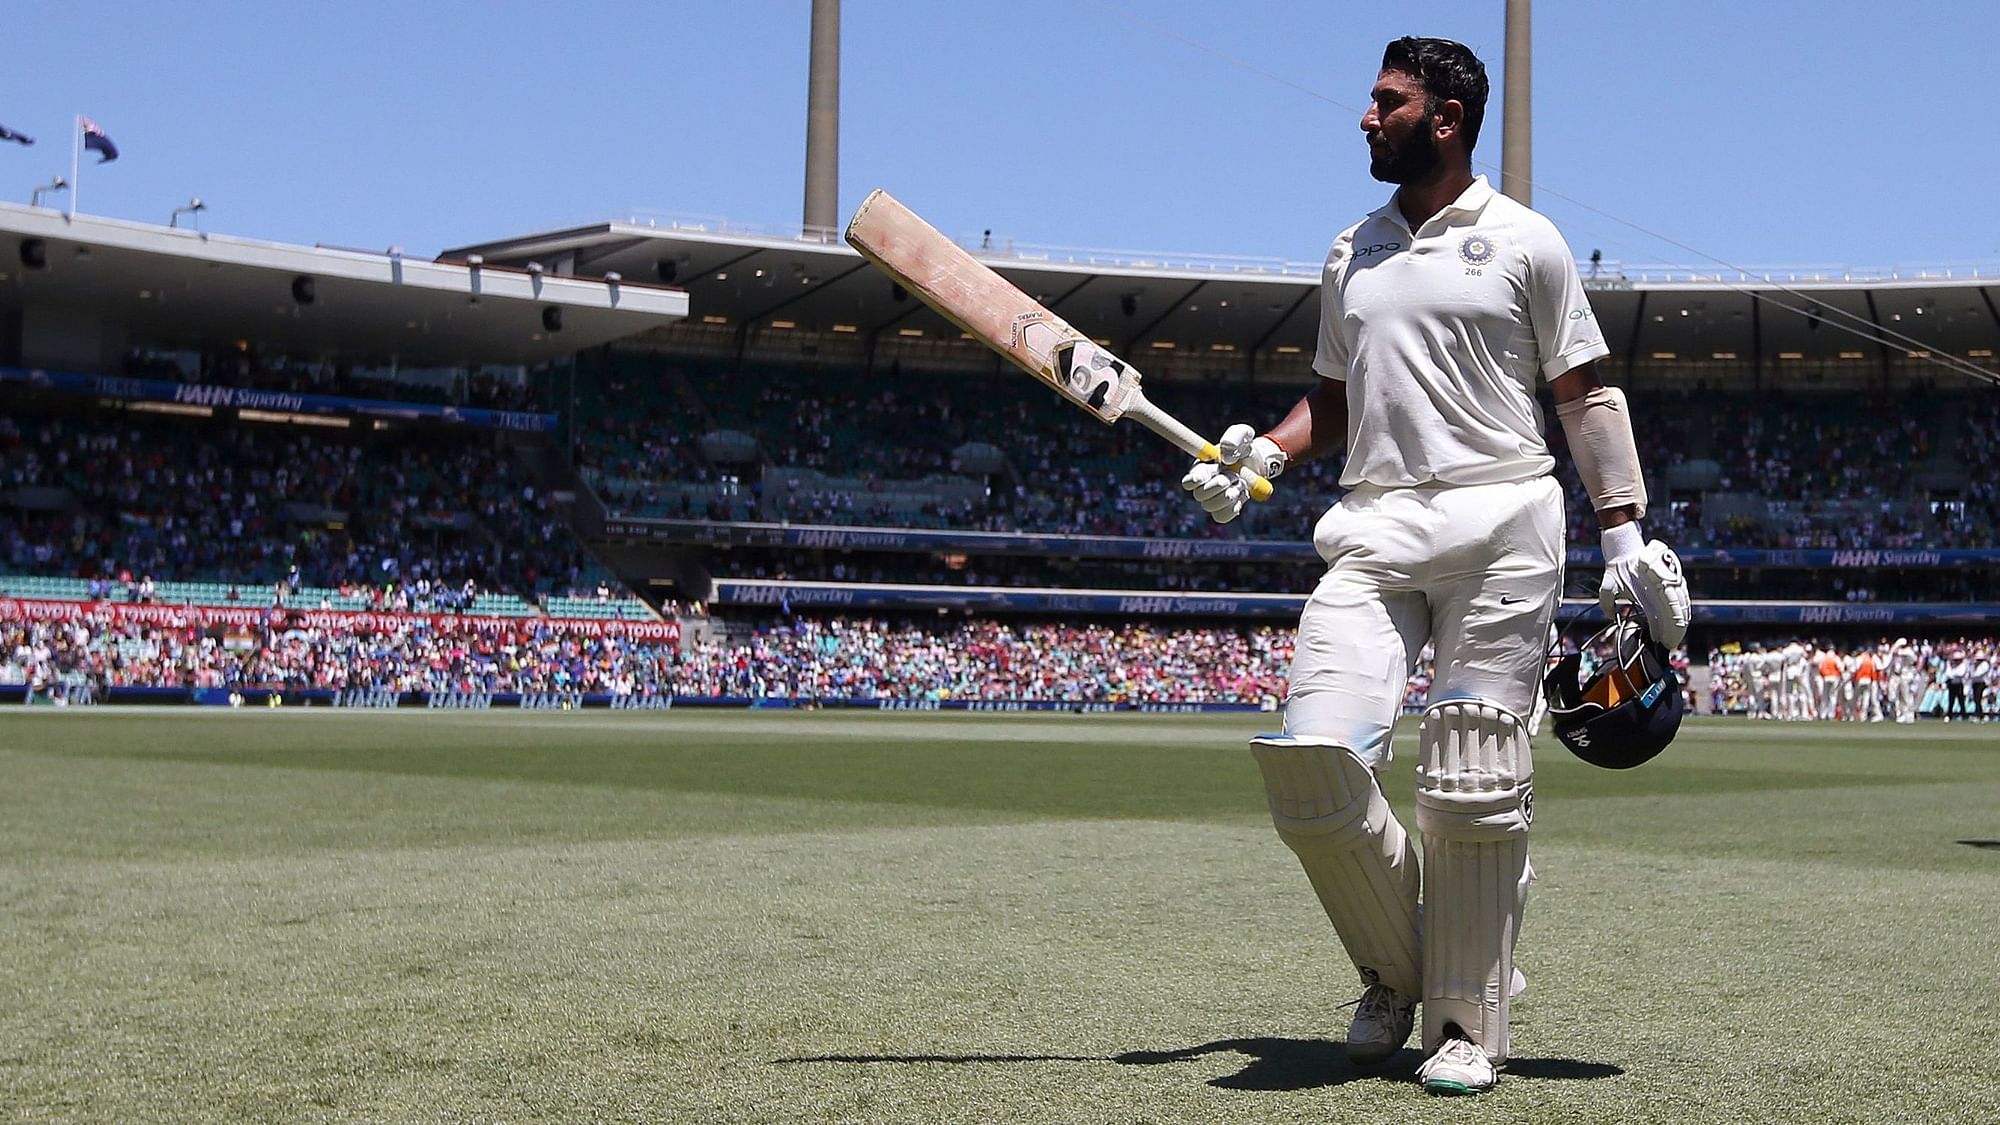 Cheteshwar Pujara missed out on his maiden overseas double century by seven runs.